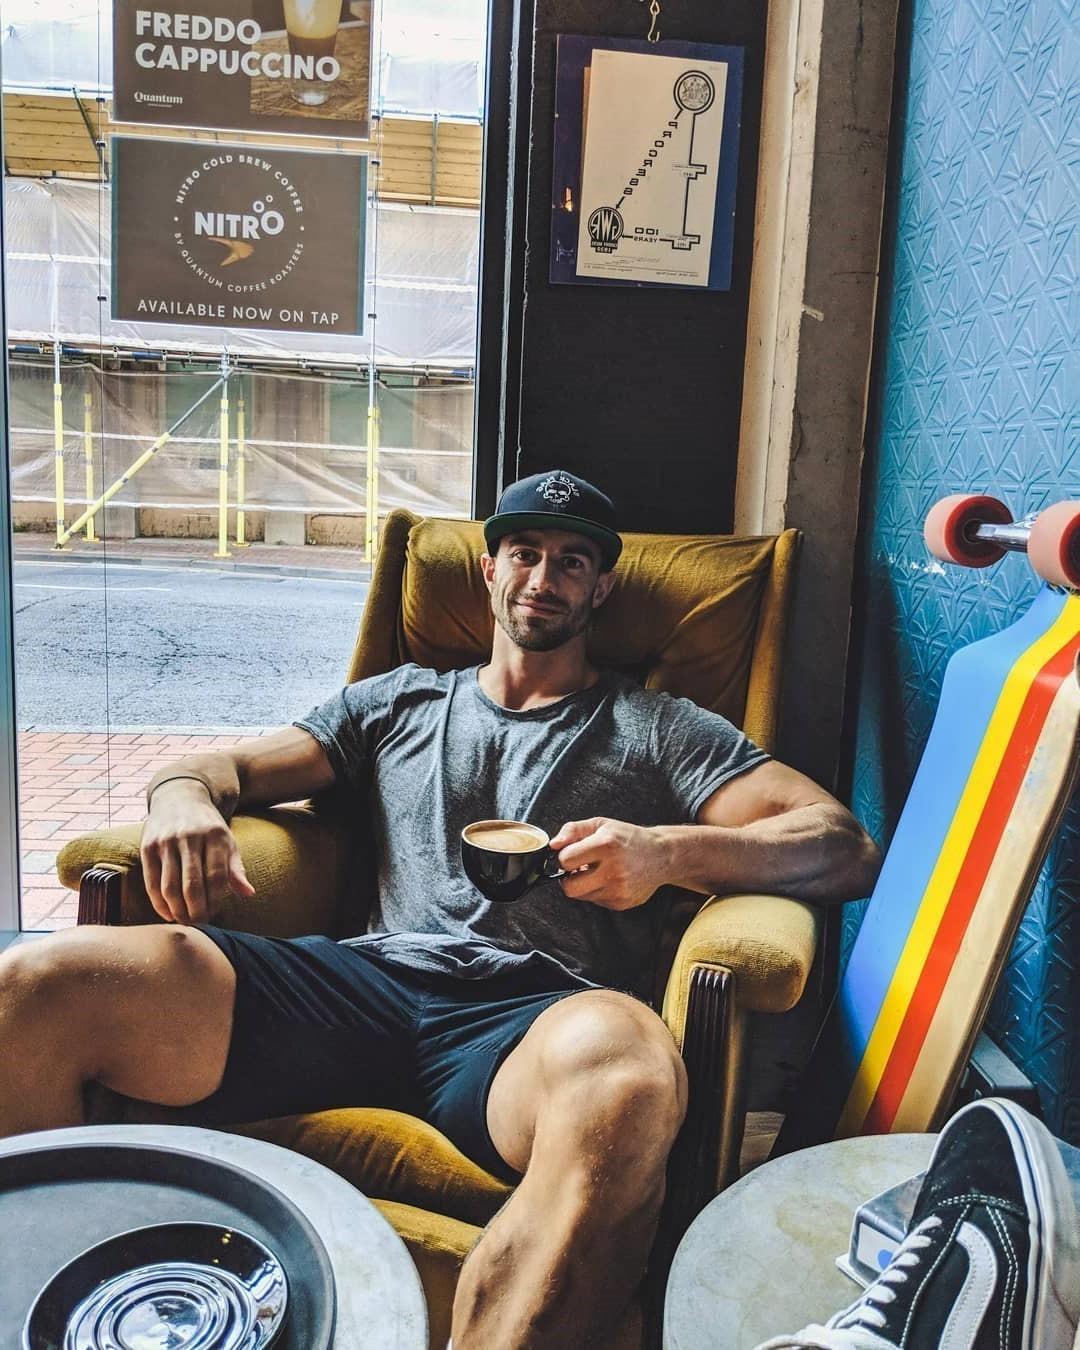 hunky-local-dilf-drinking-coffee-shop-strong-huge-muscle-legs-smirk-smiling-face-baseball-cap-chillin